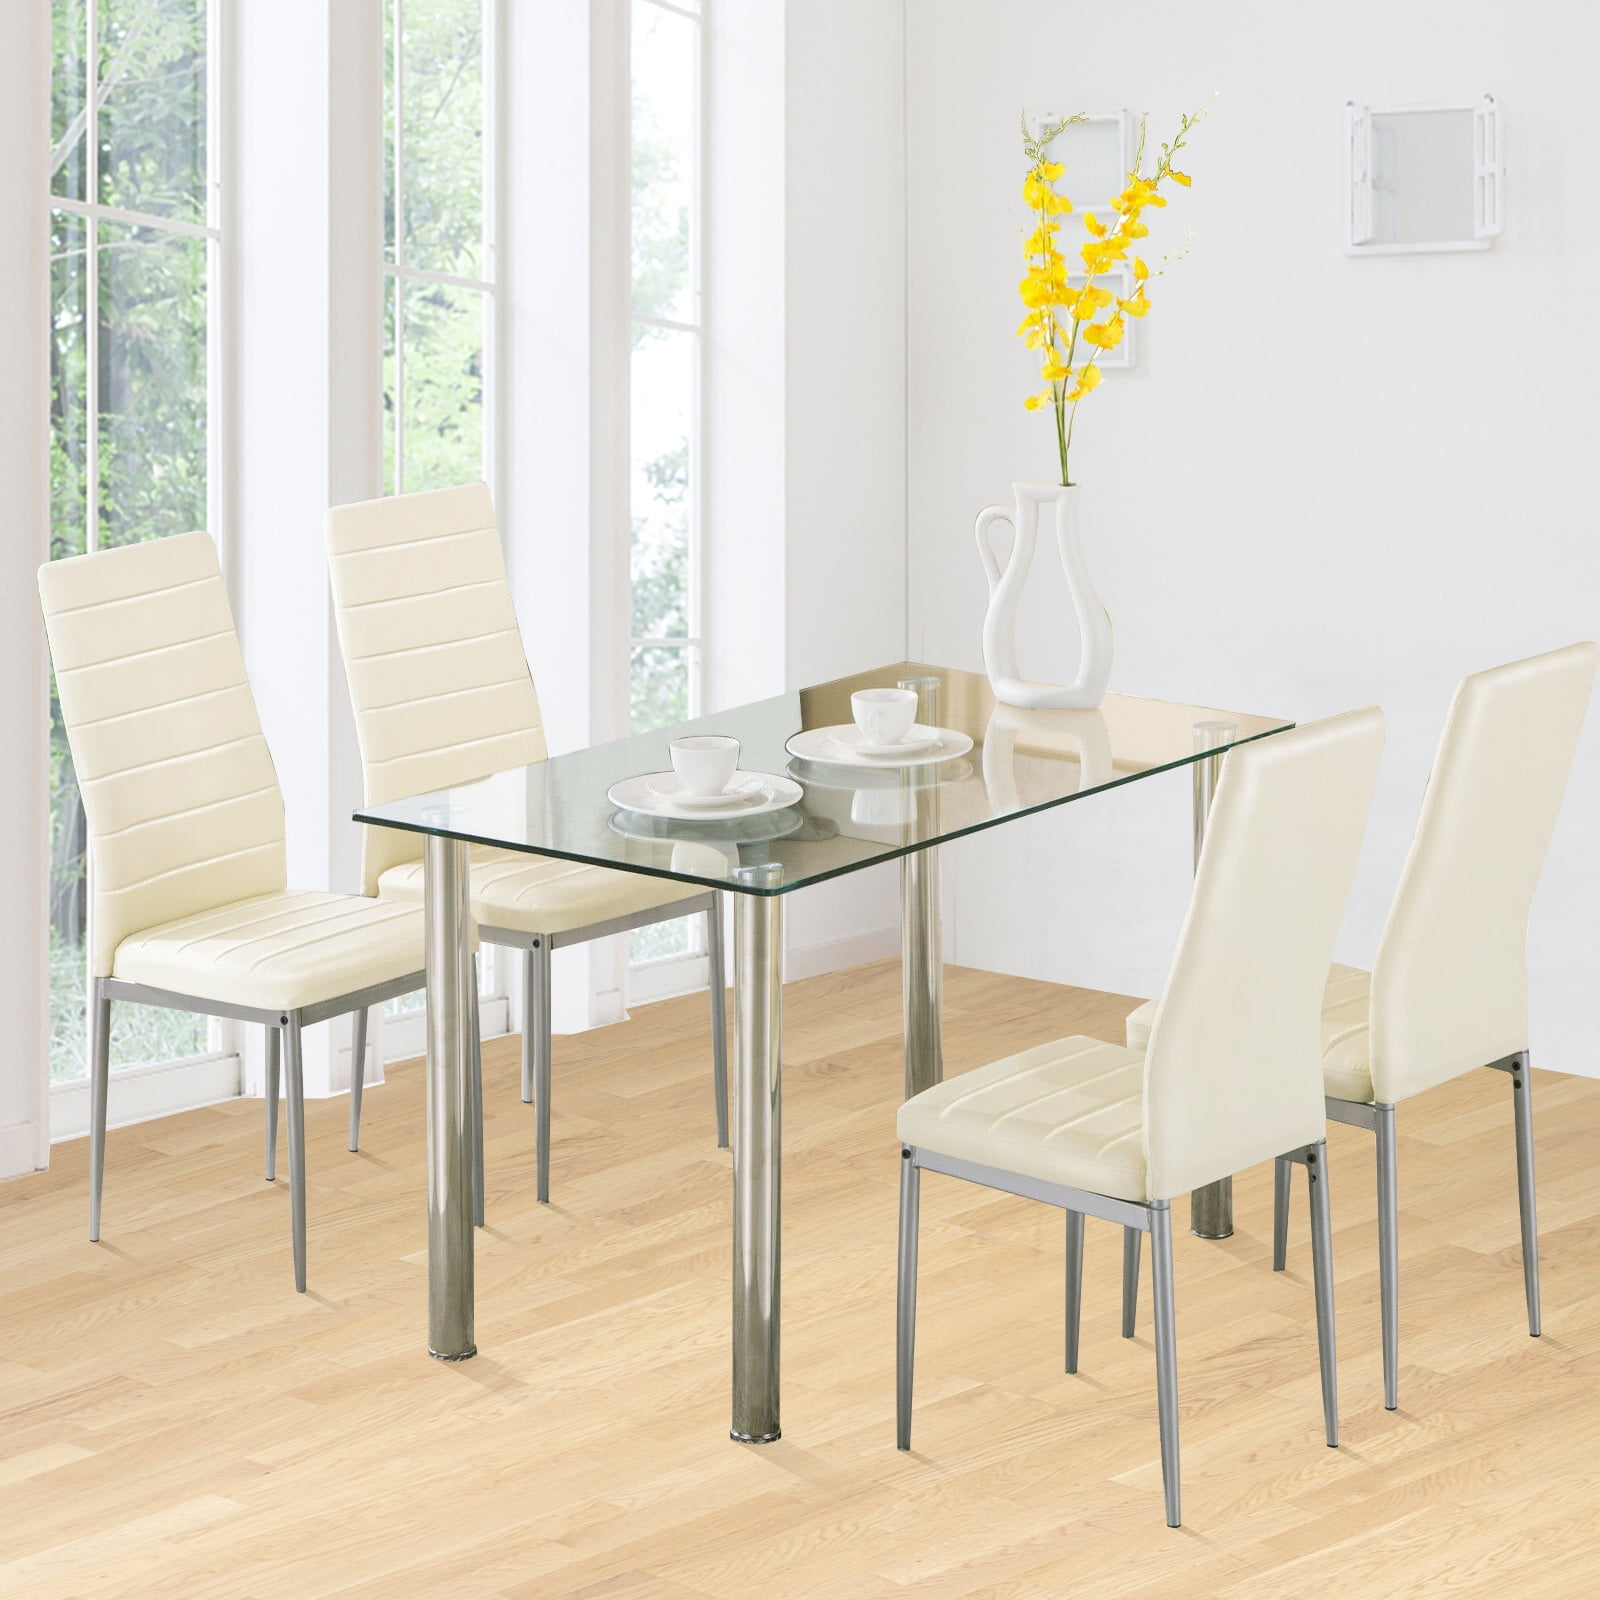 Mecor 5 Piece Dining Table Set Tempered, Glass Top Kitchen Table And Chair Sets